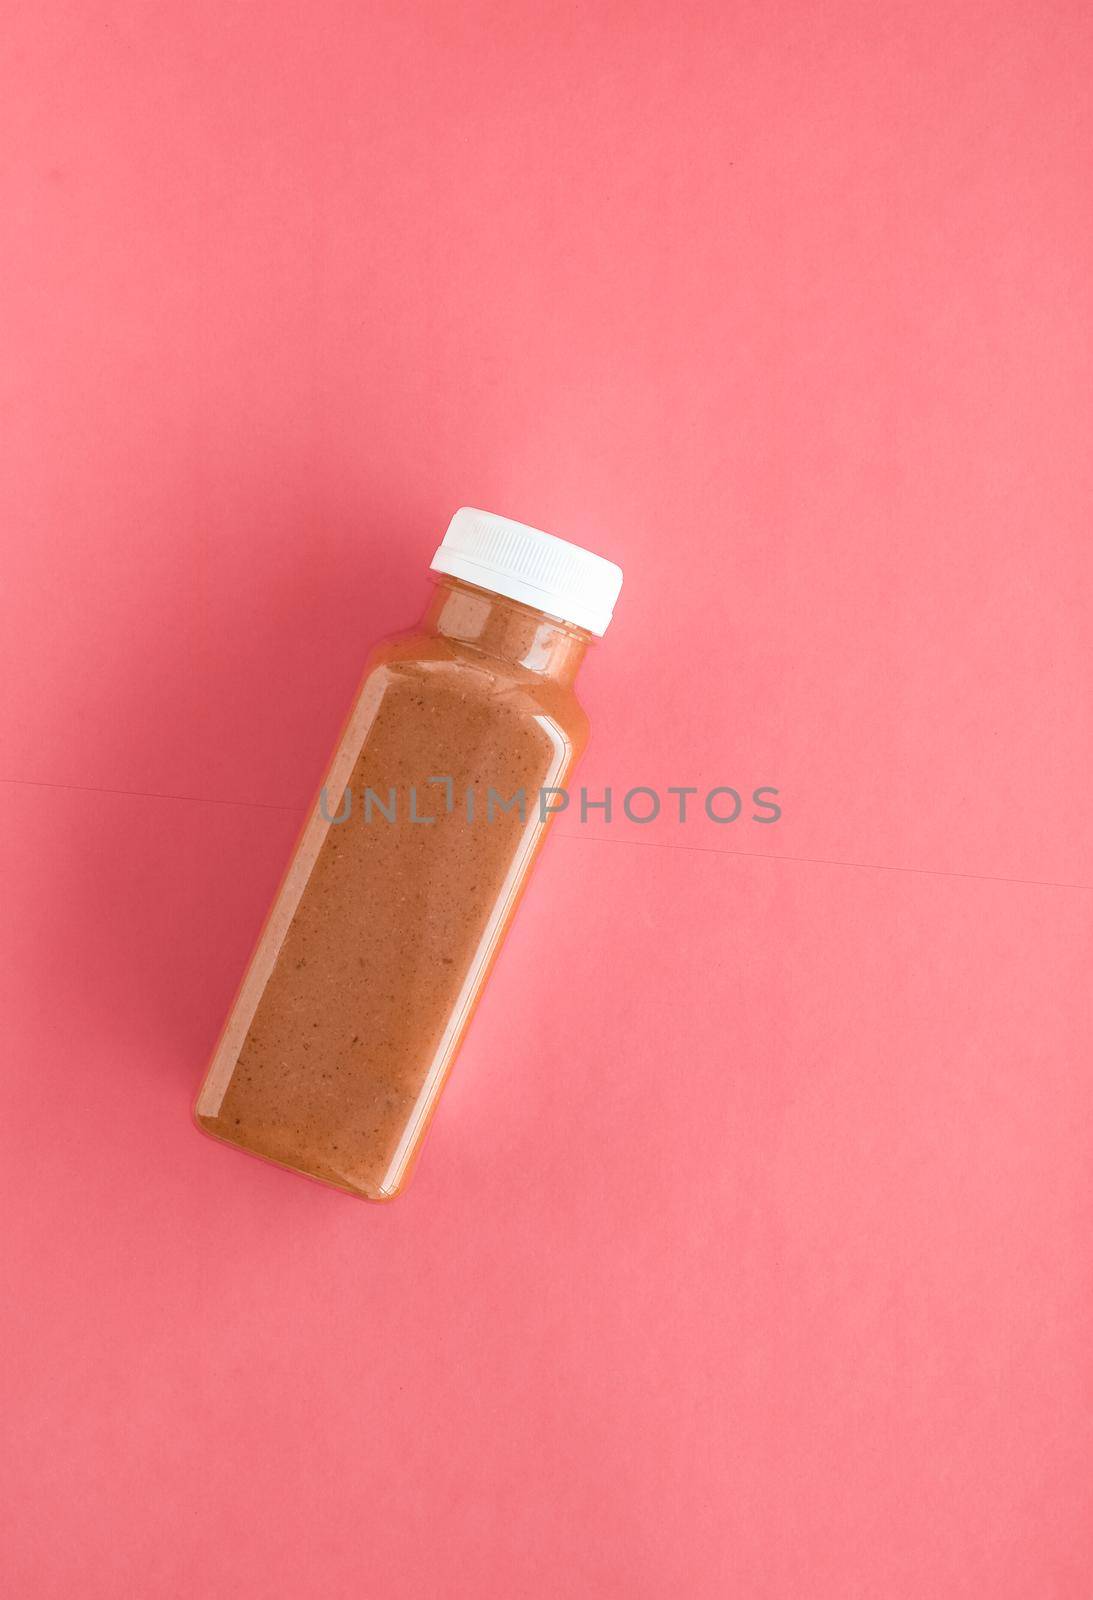 Detox superfood chocolate smoothie bottle for weight loss cleanse on.coral background, flatlay design for food and nutrition expert blog by Anneleven